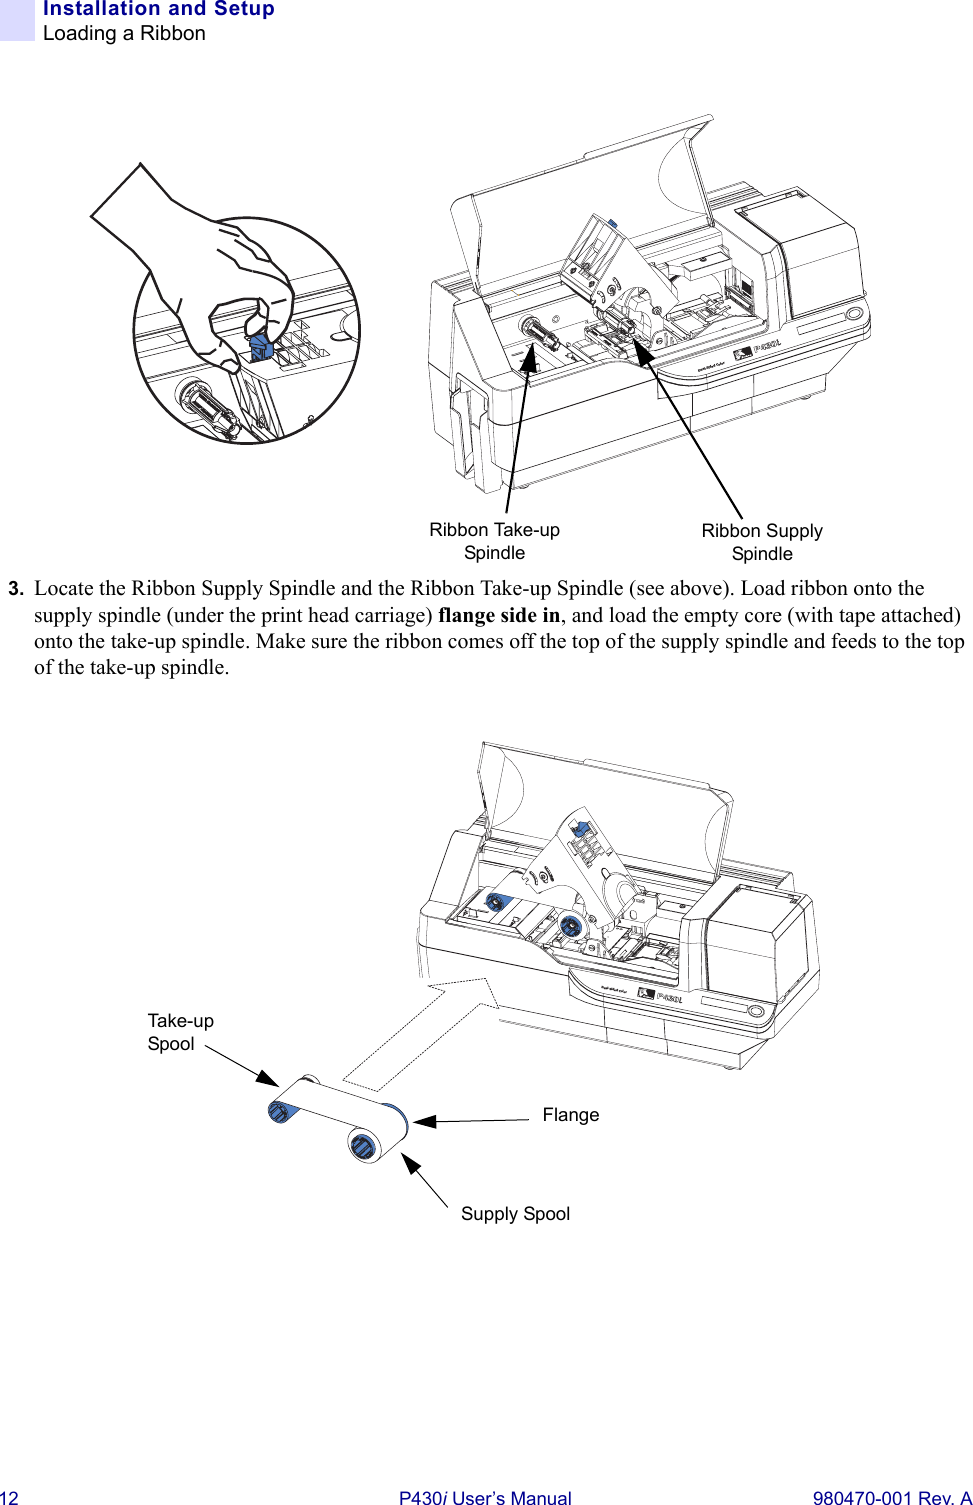 12 P430i User’s Manual 980470-001 Rev. AInstallation and SetupLoading a Ribbon3. Locate the Ribbon Supply Spindle and the Ribbon Take-up Spindle (see above). Load ribbon onto the supply spindle (under the print head carriage) flange side in, and load the empty core (with tape attached) onto the take-up spindle. Make sure the ribbon comes off the top of the supply spindle and feeds to the top of the take-up spindle.Dual-Sided ColorRibbon Supply SpindleRibbon Take-up SpindleDual-Sided ColorFlangeSupply SpoolTake-u p  Spool